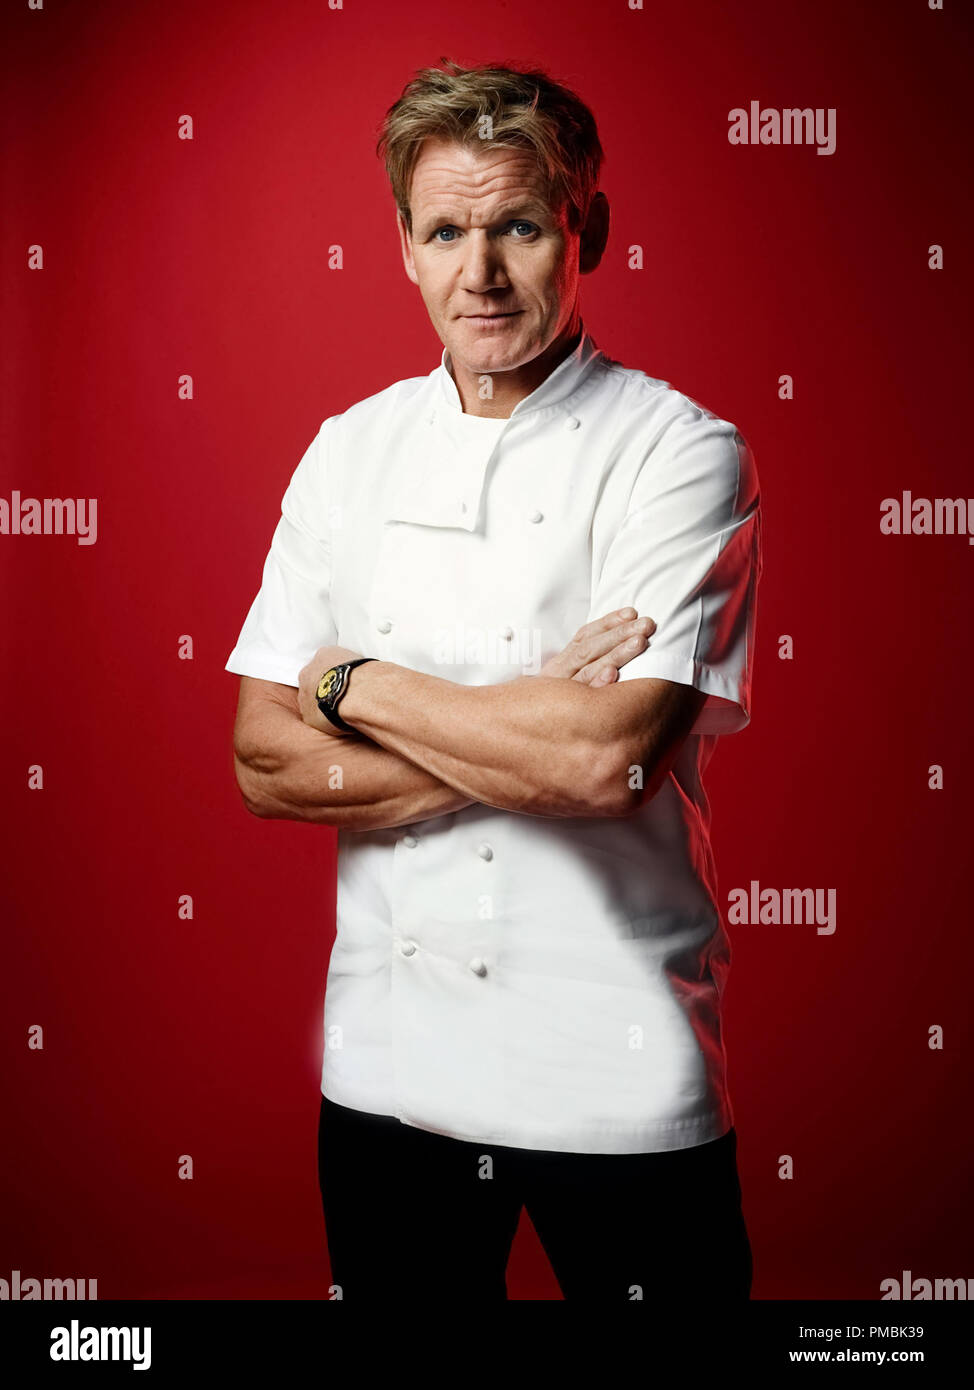 Hells Kitchen The Competition Heats Up When Chef Gordon Ramsay